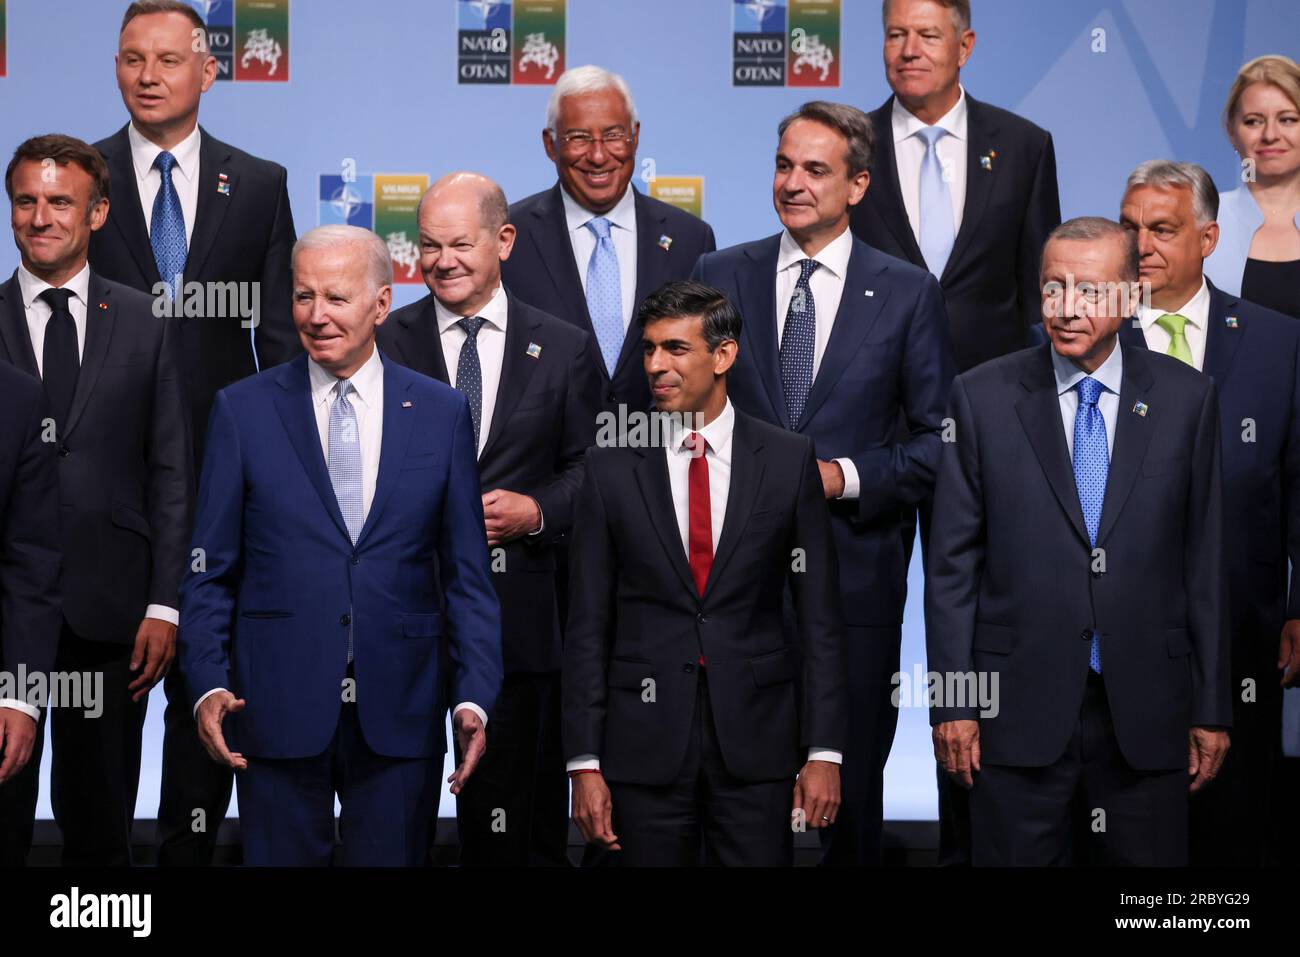 Vilnius, Lithuania. 11th July, 2023. U.S. President Joe Biden, left, stands together with British Prime Minister Rishi Sunak, center, and other leaders of NATO nations during the family photo at the start of the NATO Summit, July 11, 2023 in Vilnius, Lithuania. Credit: Simon Dawson/Simon Dawson/No 10 Downing Street/Alamy Live News Stock Photo